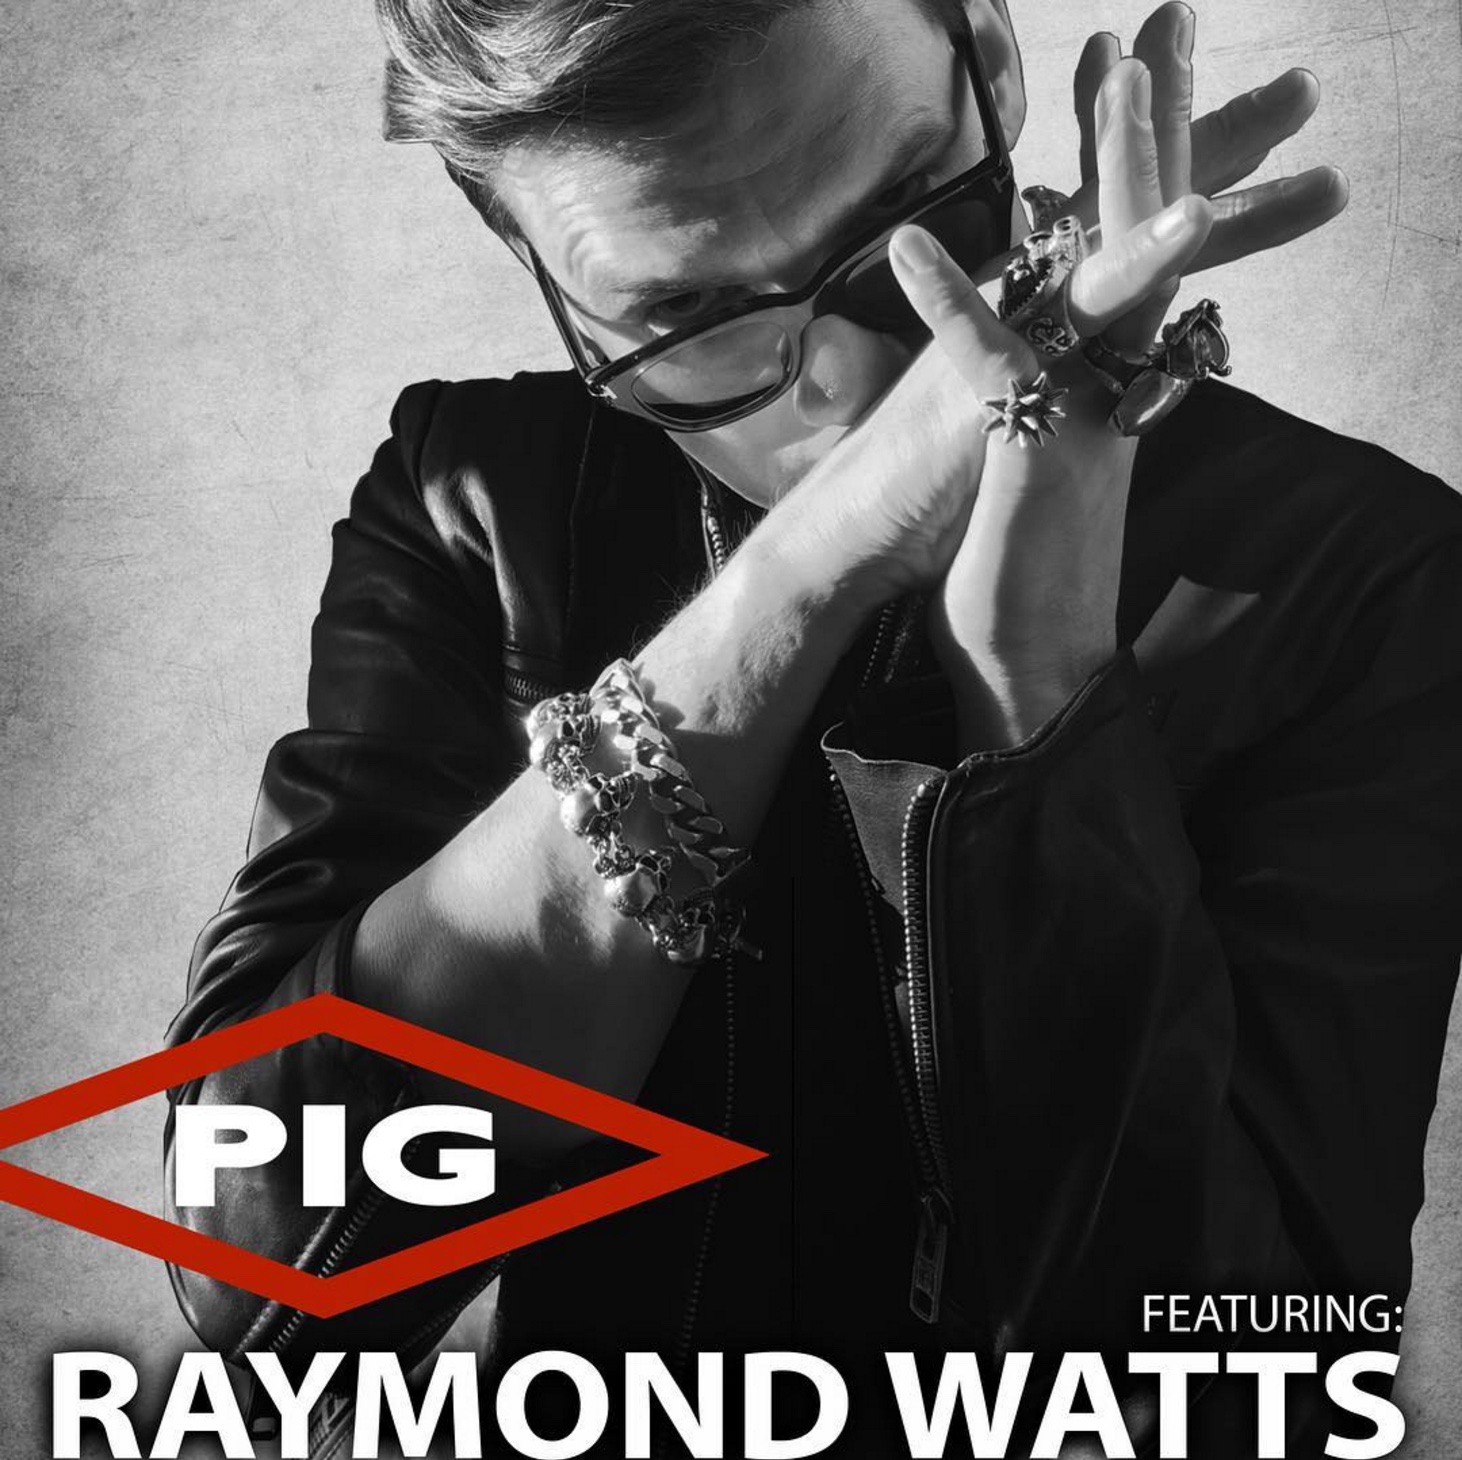 OFFICIAL SITE of <PIG>, Raymond Watts' industrial rock band